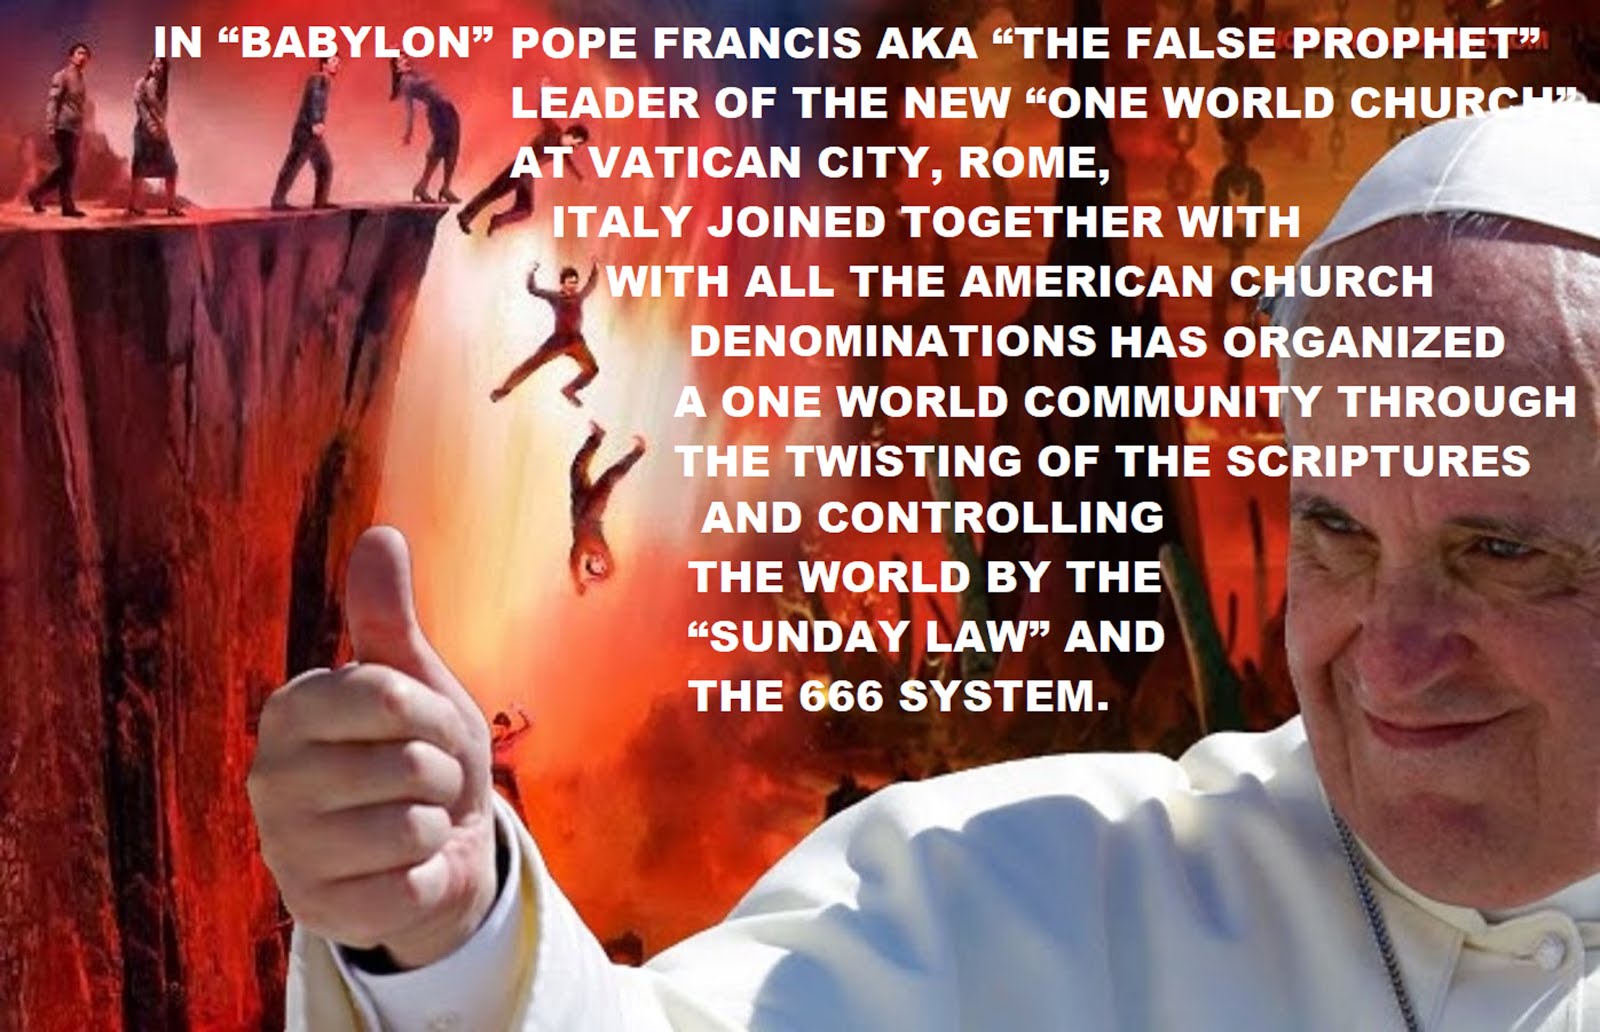 POPE FRANCIS AND "THE SUNDAY LAW"